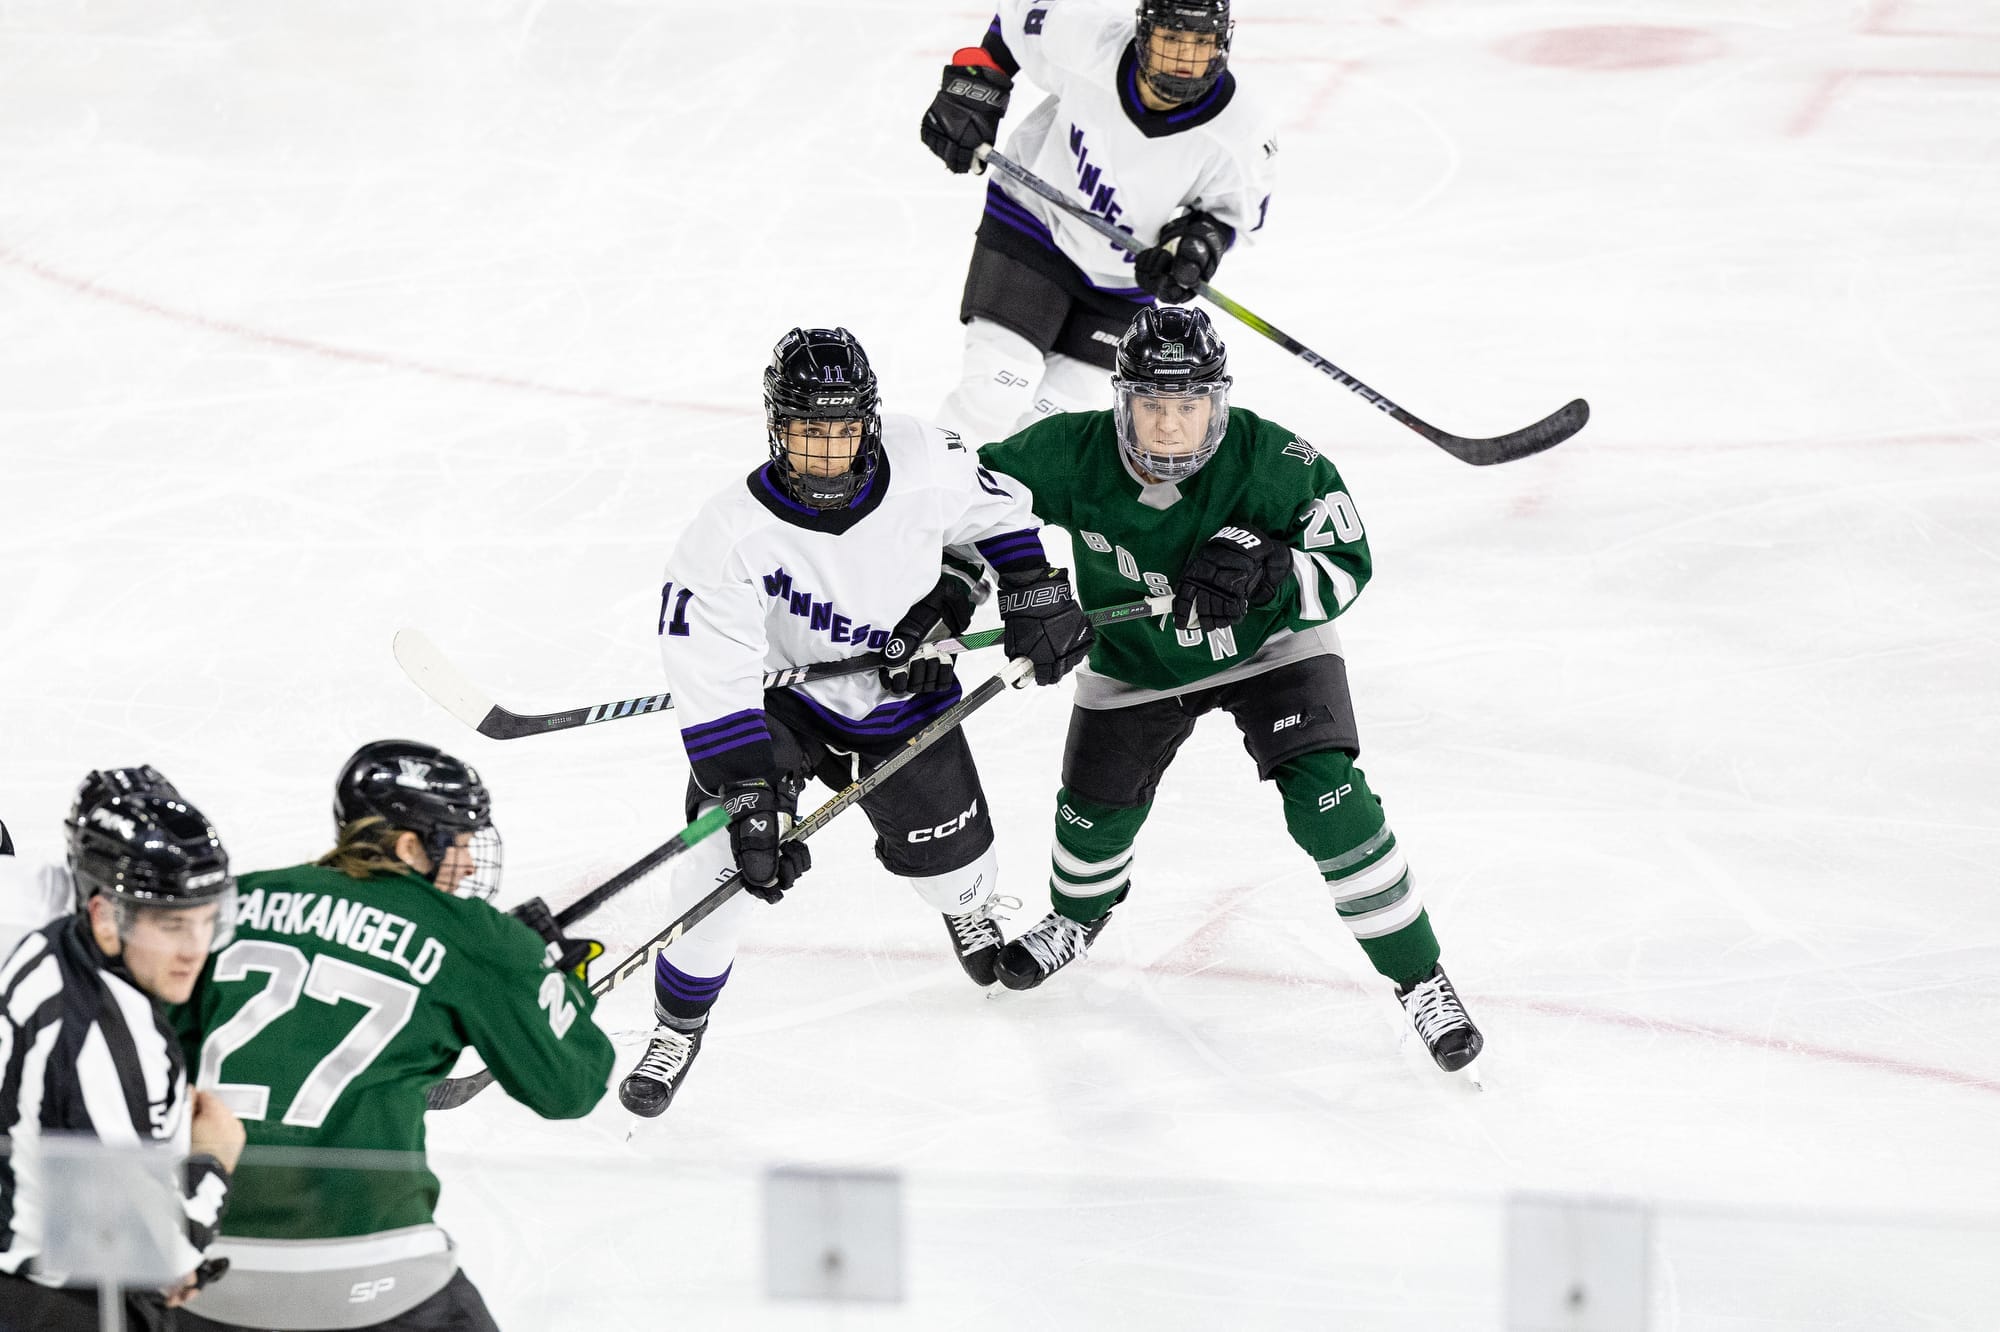 Hannah Brandt and Sophia Kunin battle for positioning. Brandt is wearing a green home uniform, while Kunin is in a white away uniform.